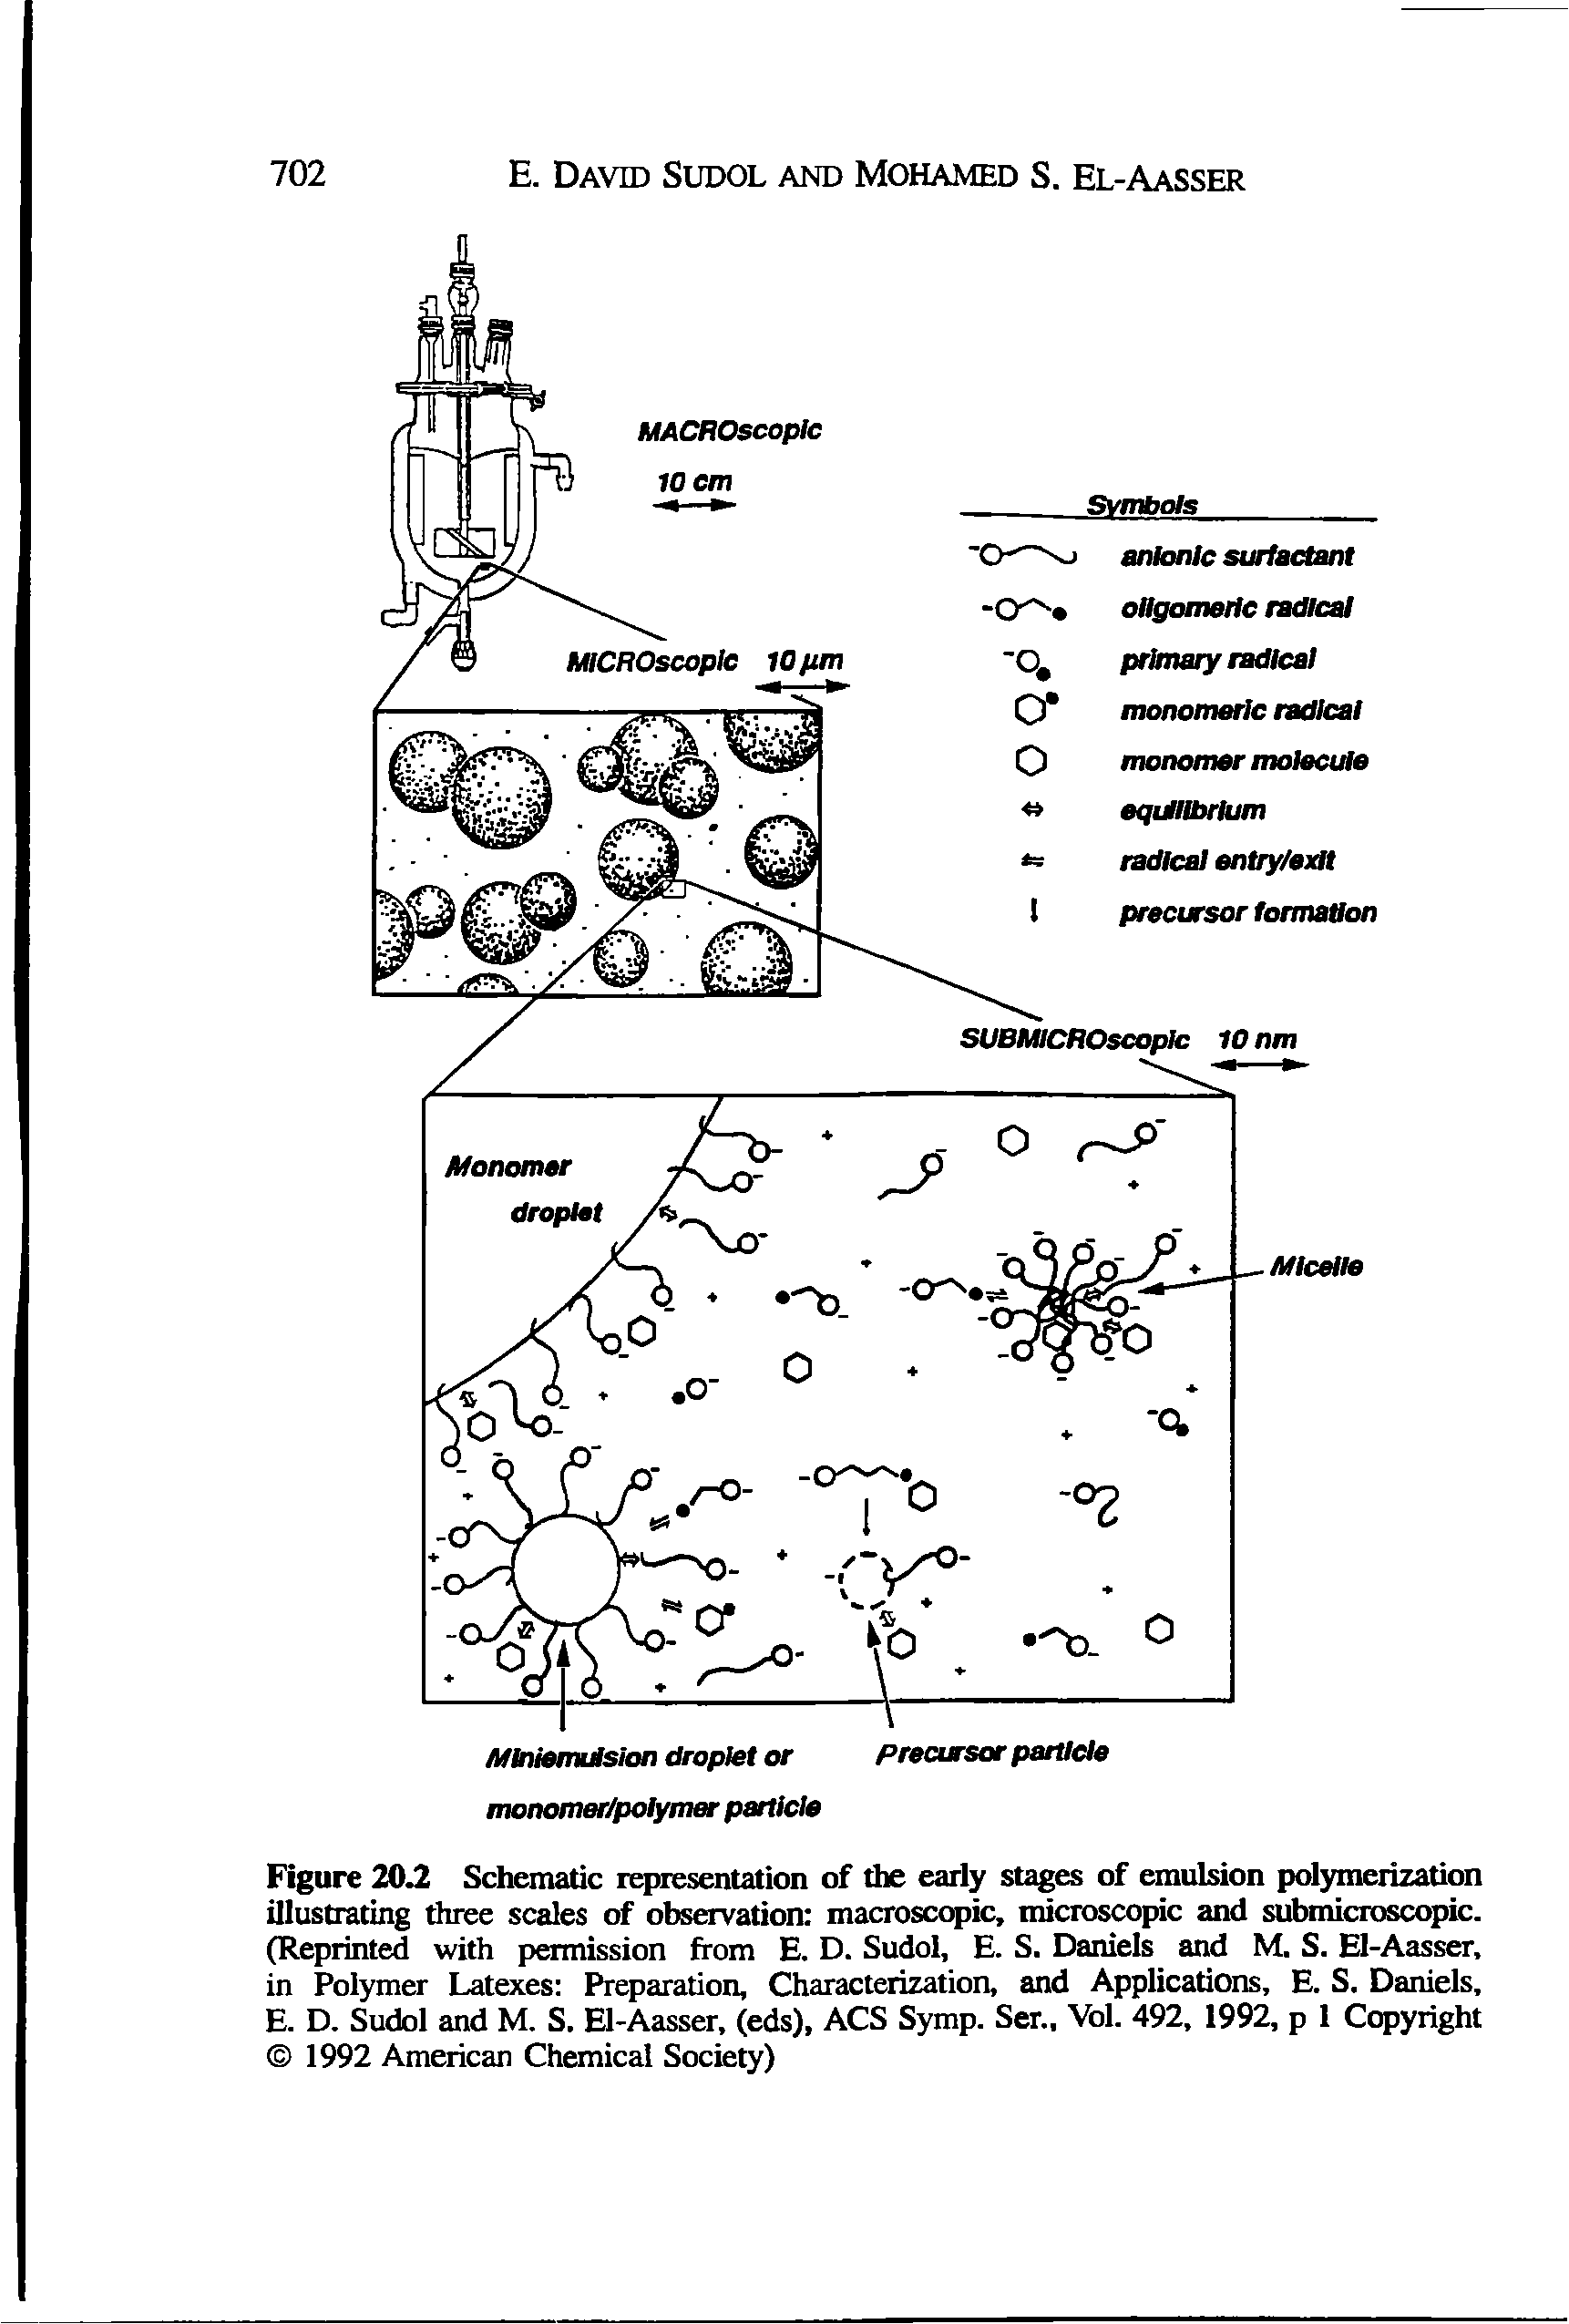 Figure 210 2 Schematic representation of the early stages of emulsion polymerization illustrating three scales of observation macroscopic, microscopic and submicroscopic. (Reprinted with permission from E. D. Sudol, E. S. Daniels and M. S. El-Aasser, in Polymer Latexes Preparation, Characterization, and Applications, E. S. Daniels, E. D. Sudol and M. S. El-Aasser, (eds), ACS Symp. Sen, Vol. 492, 1992, p 1 Copyright 1992 American Chemical Society)...